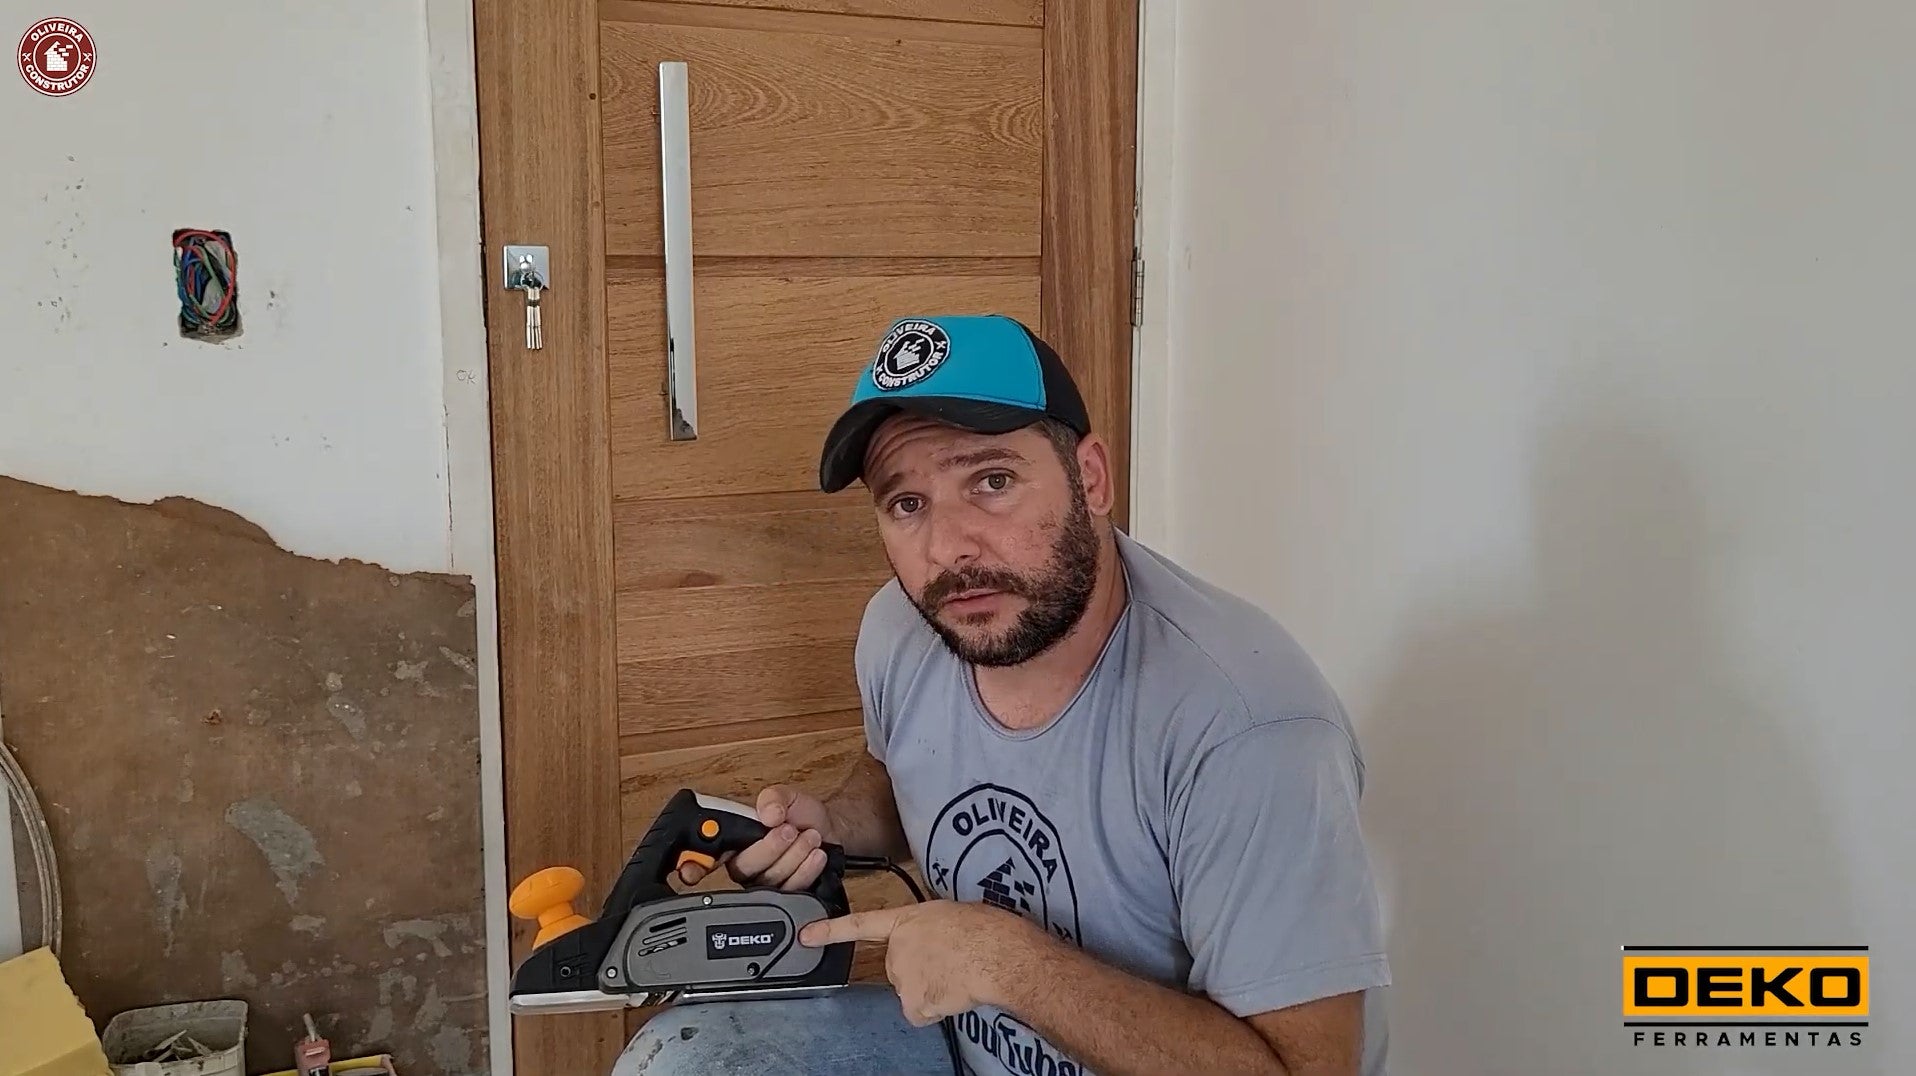 Professionals in Brazil use DEKO power tools to do the home repair